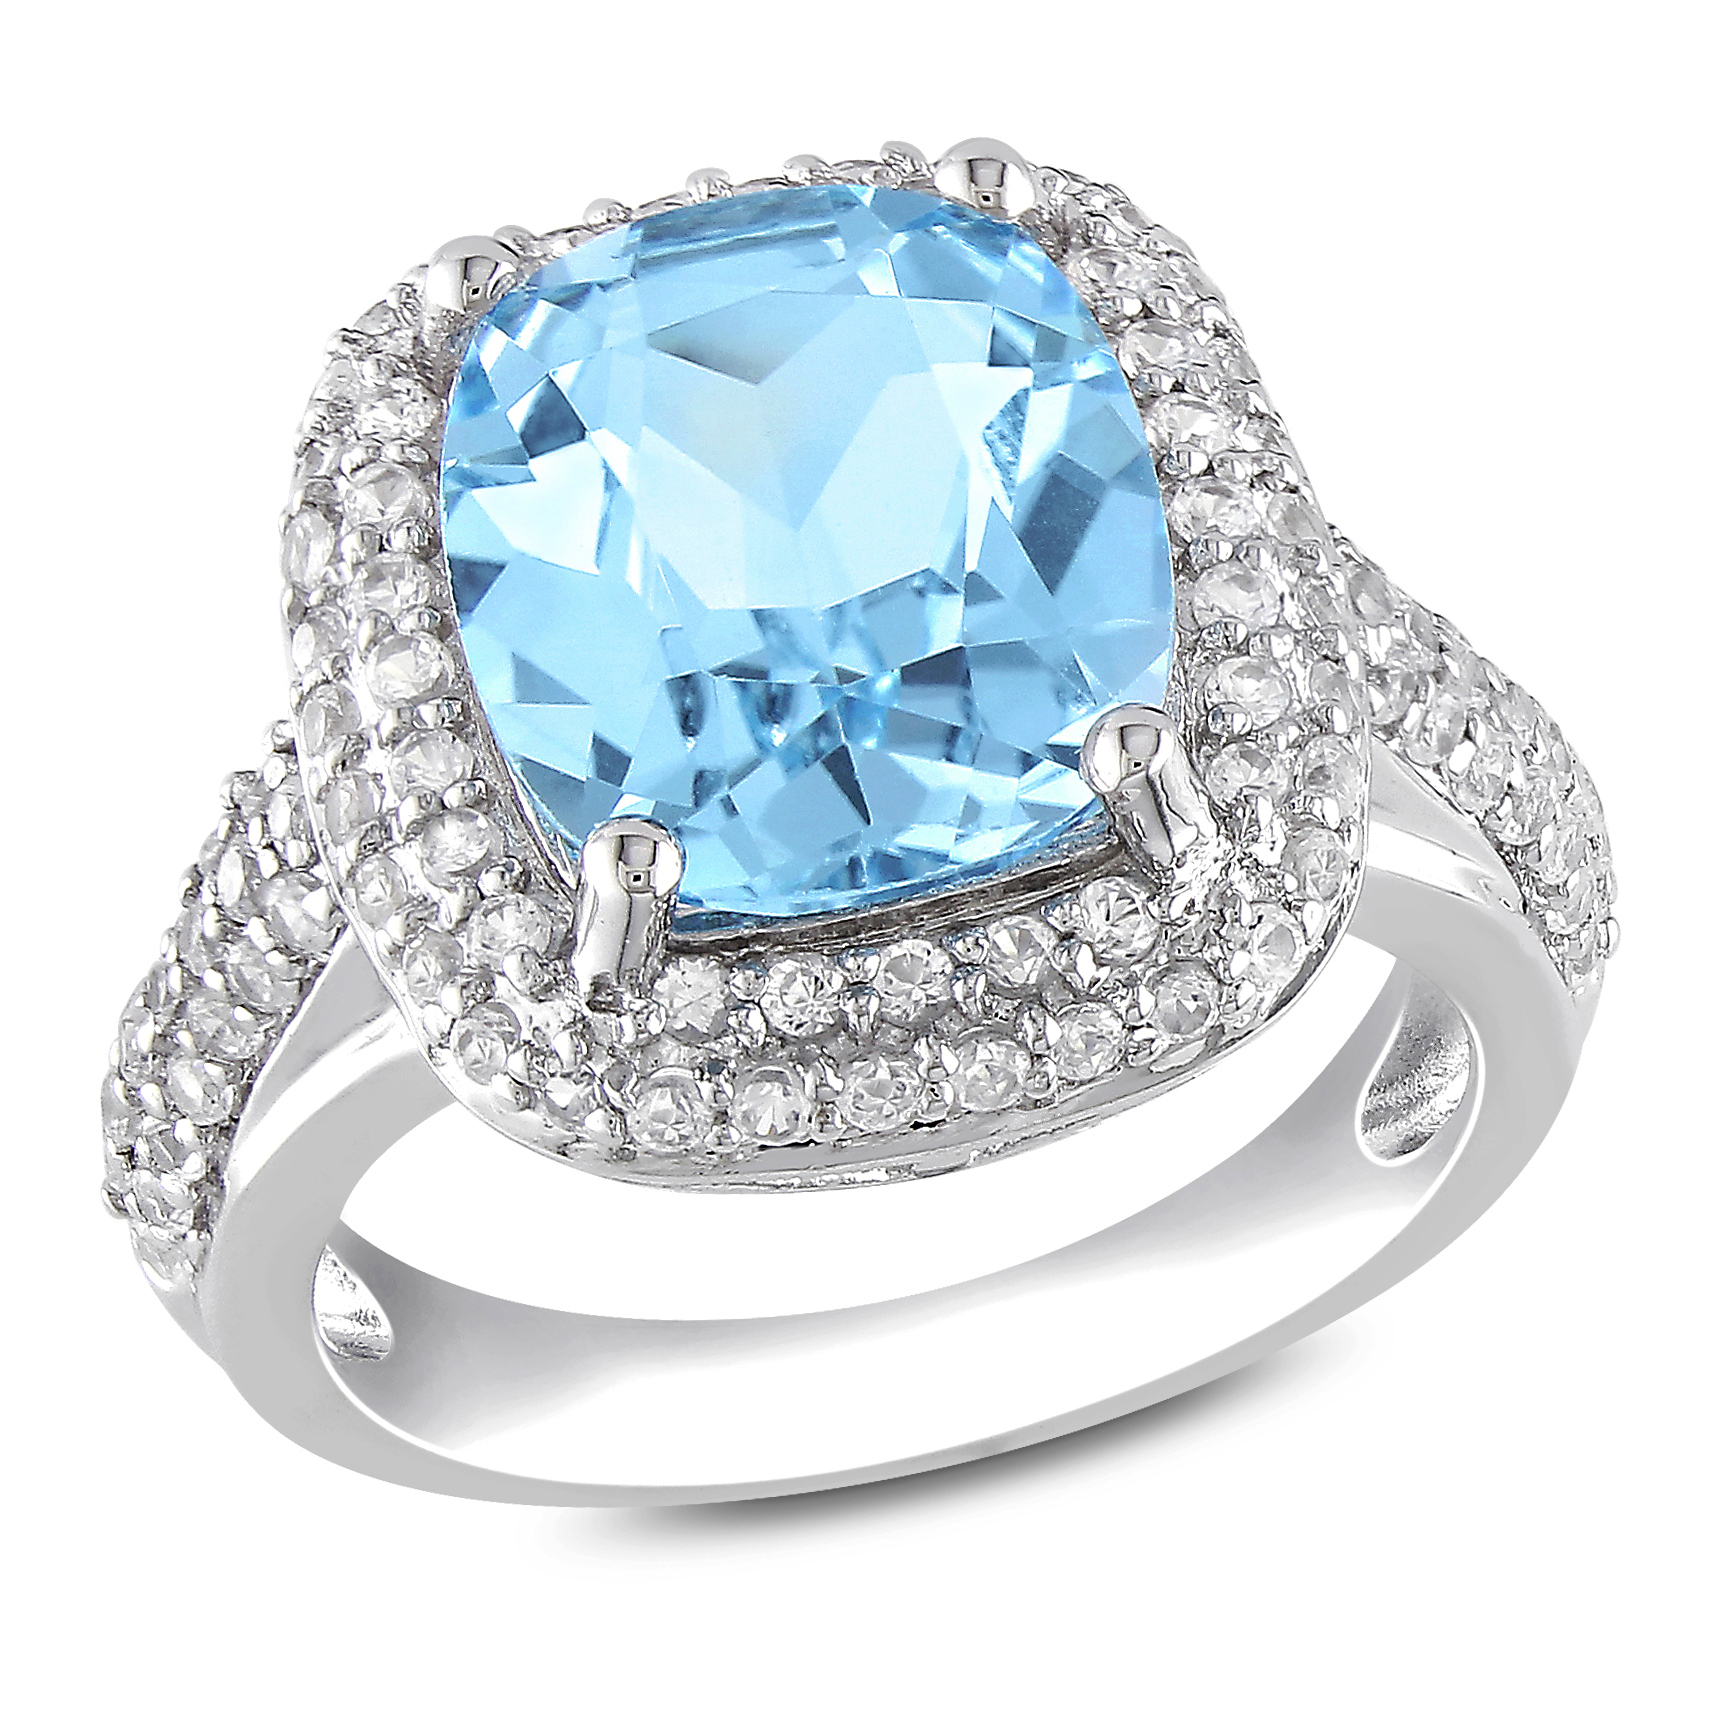 Amour 7 1/4 Carat T.G.W. Blue Topaz Created White Sapphire Fashion Ring in Sterling Silver